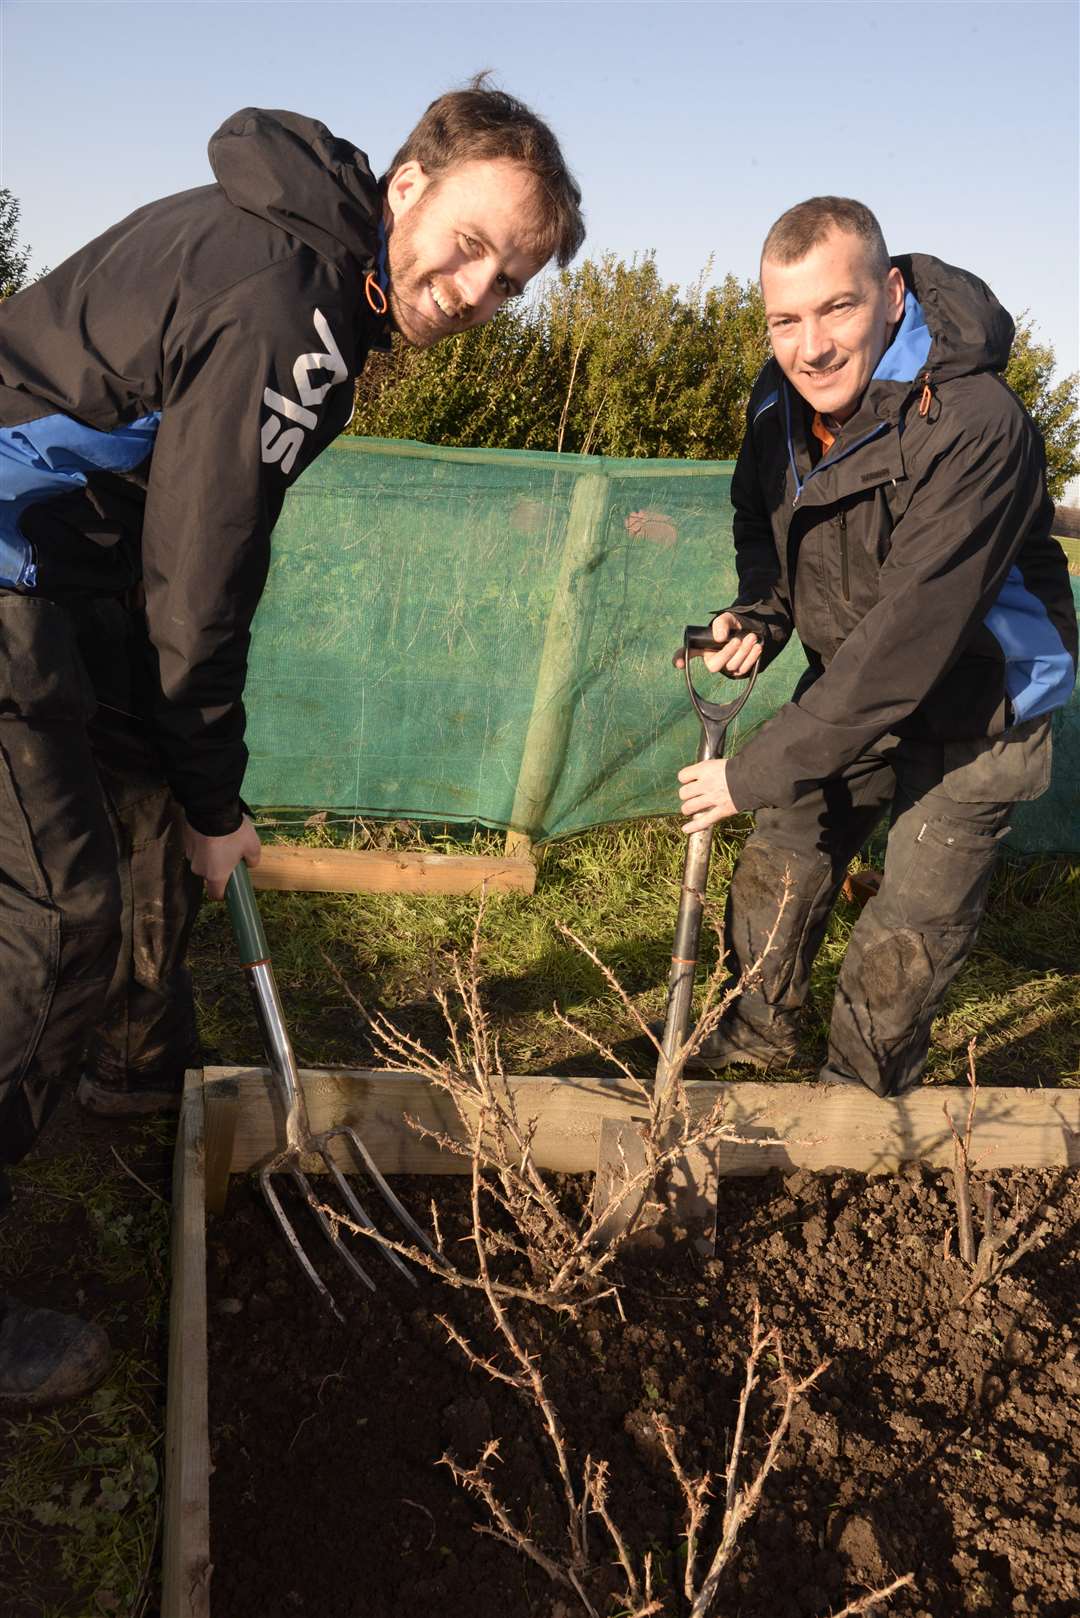 They organised it, and now they're digging: Sky engineers Sean Cozens and Kevin Biddle